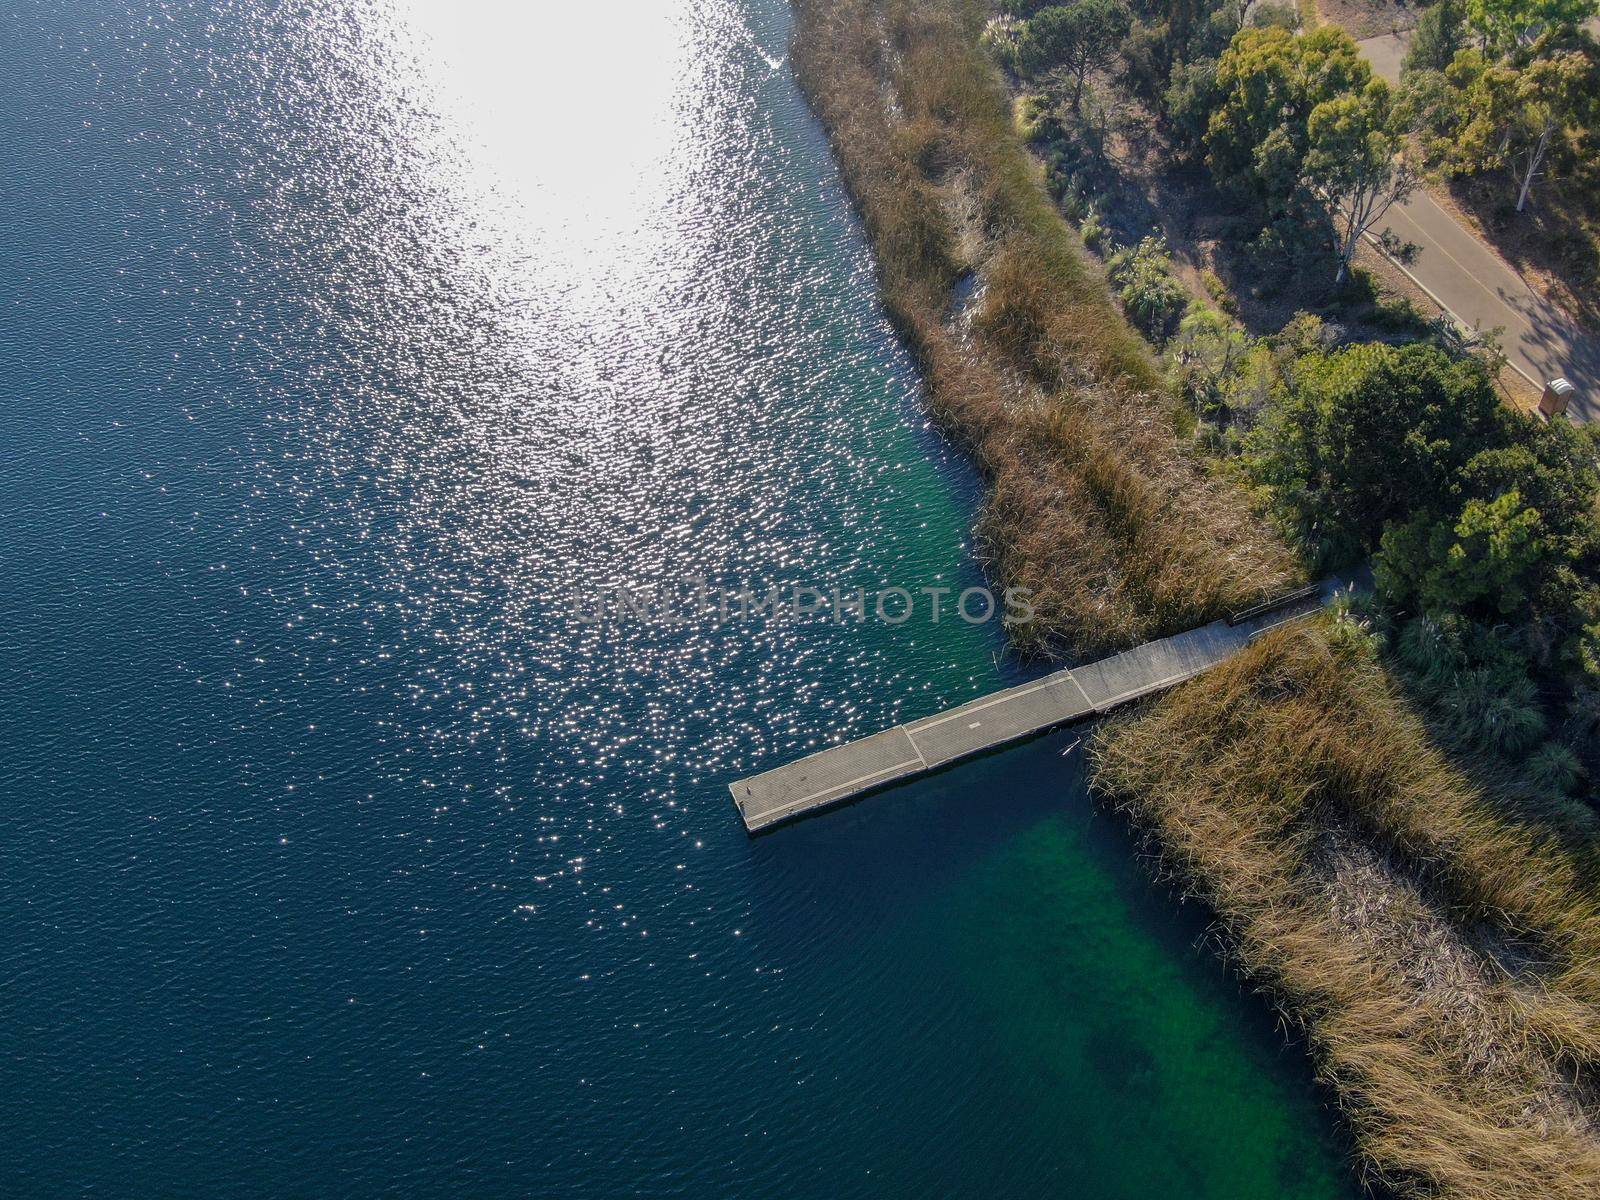 Aerial view of wood pier with fishers and their fishing rods at the Miramar lake, San Diego by Bonandbon